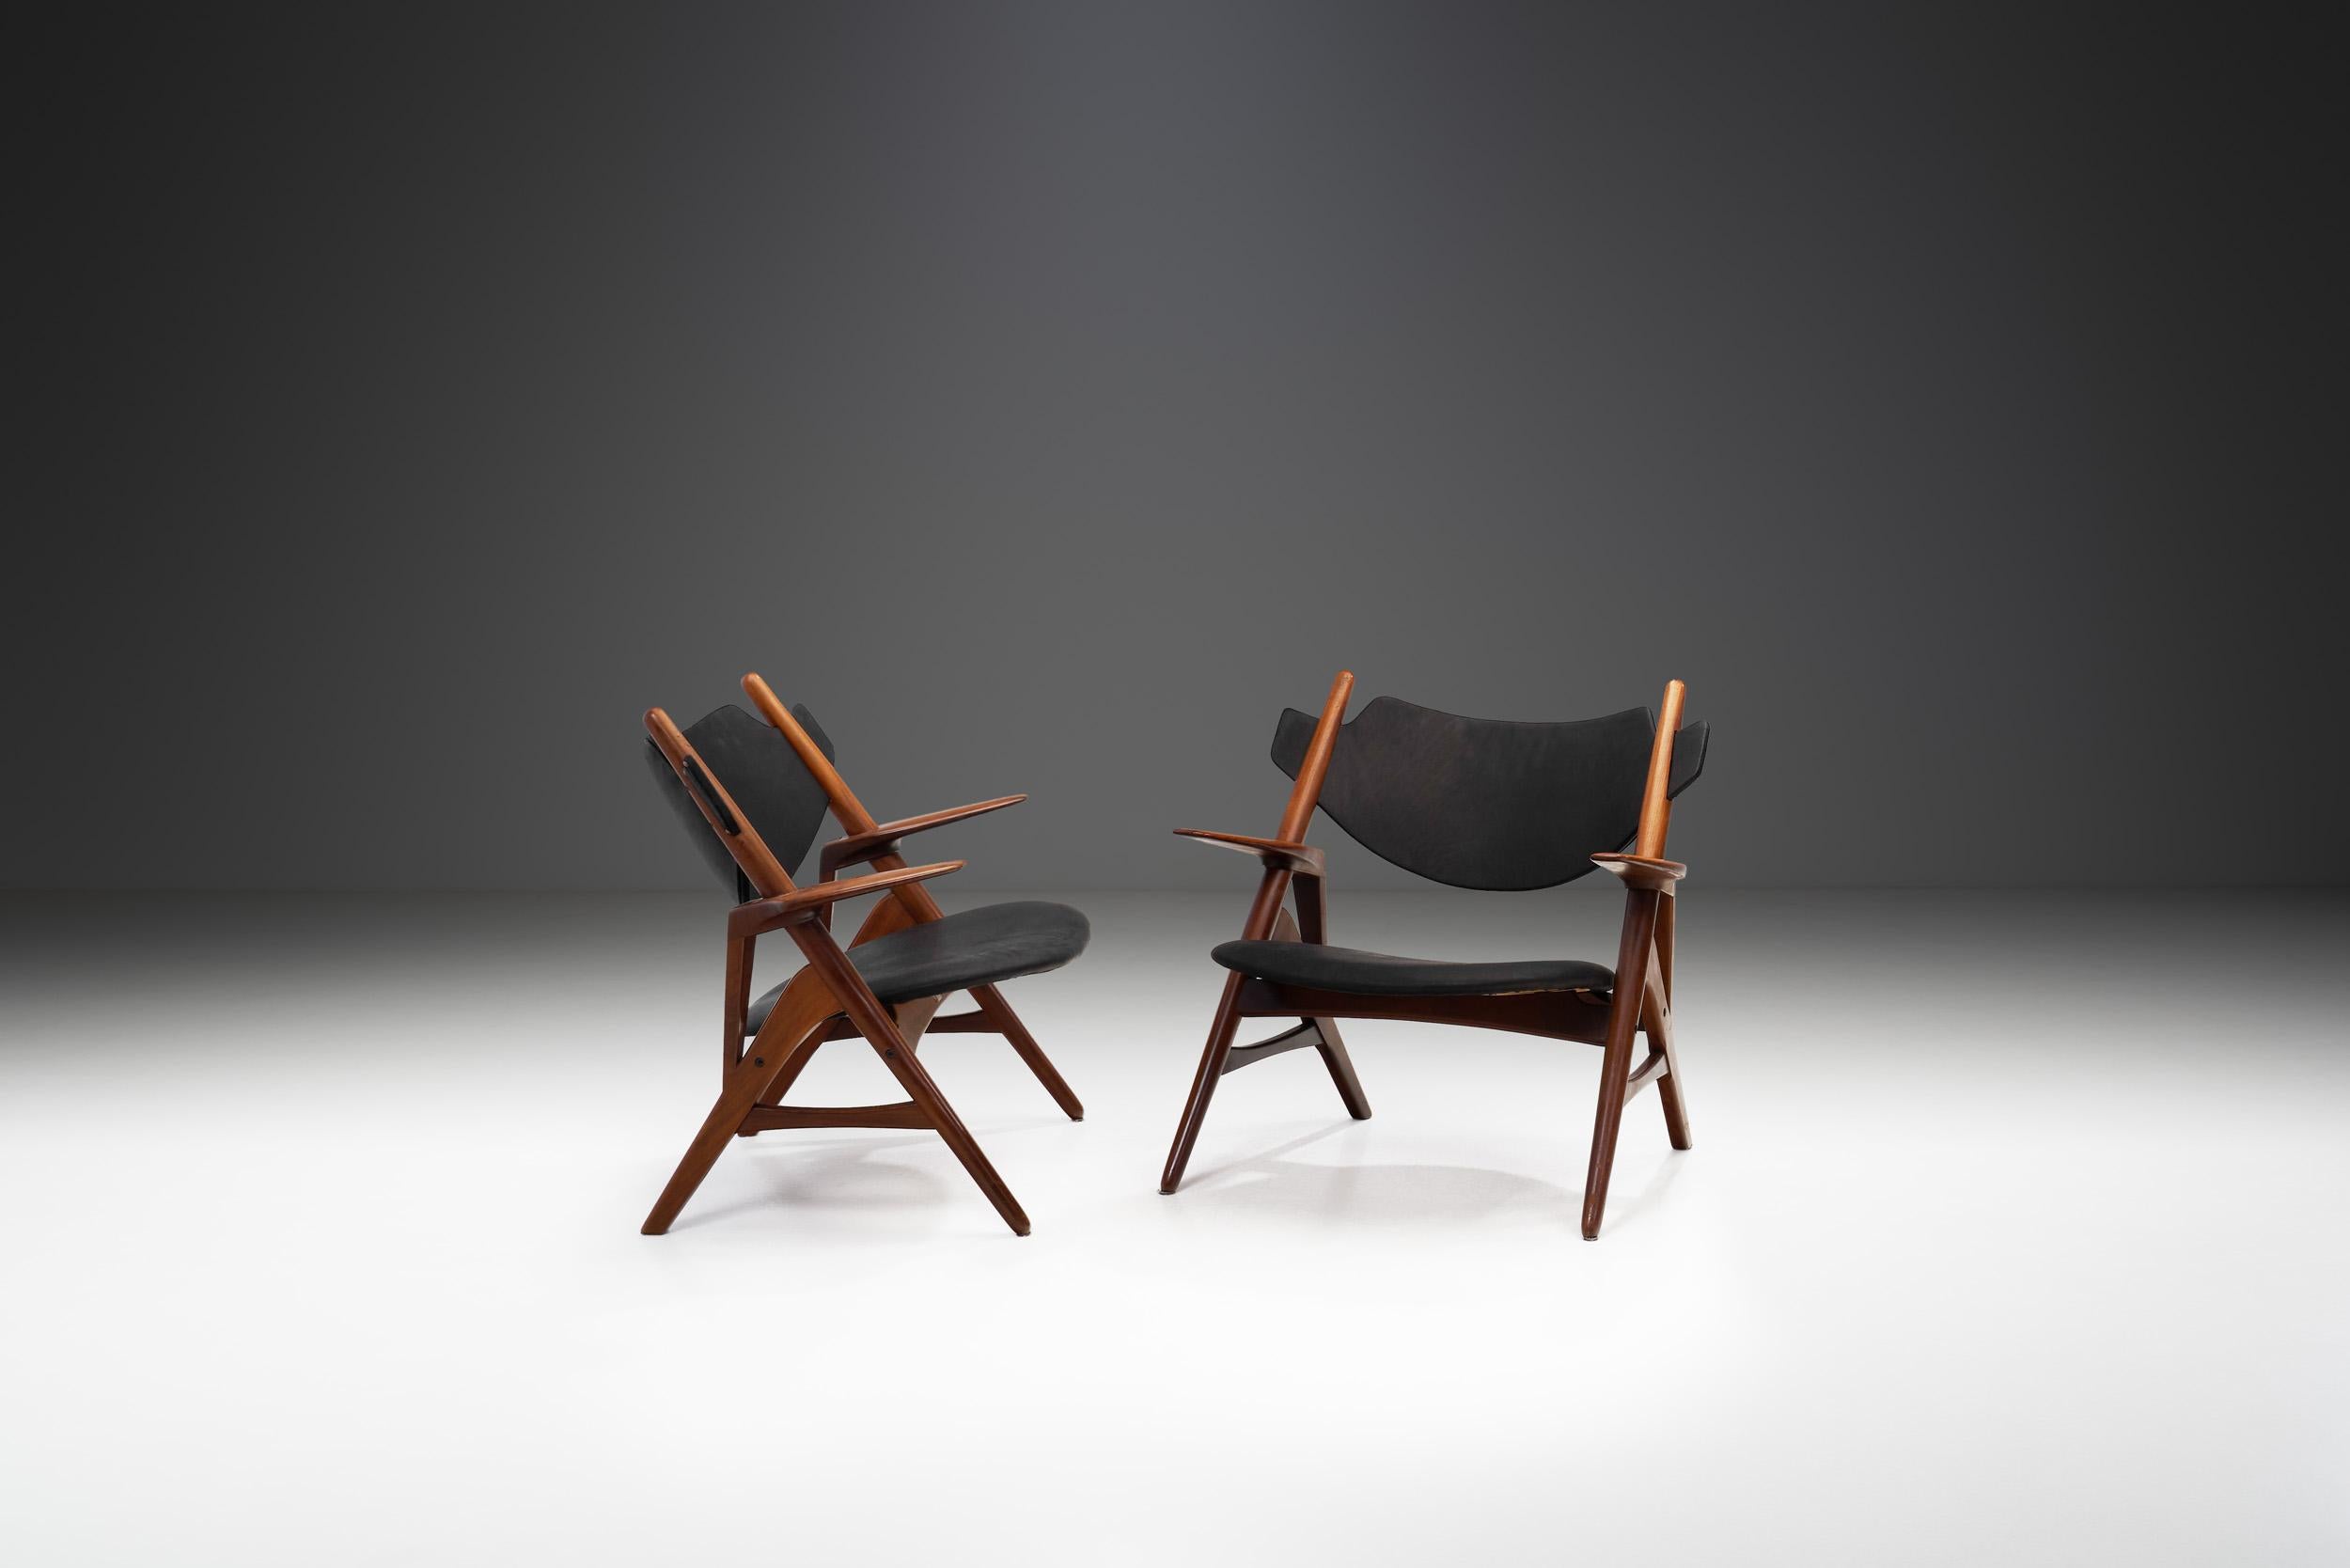 Danish Modern designers are the undisputed masters of mid-century modern chair design. As this pair shows, their furniture generally united form and function; in every design, they placed the highest demands on comfort and ergonomics. To Danish